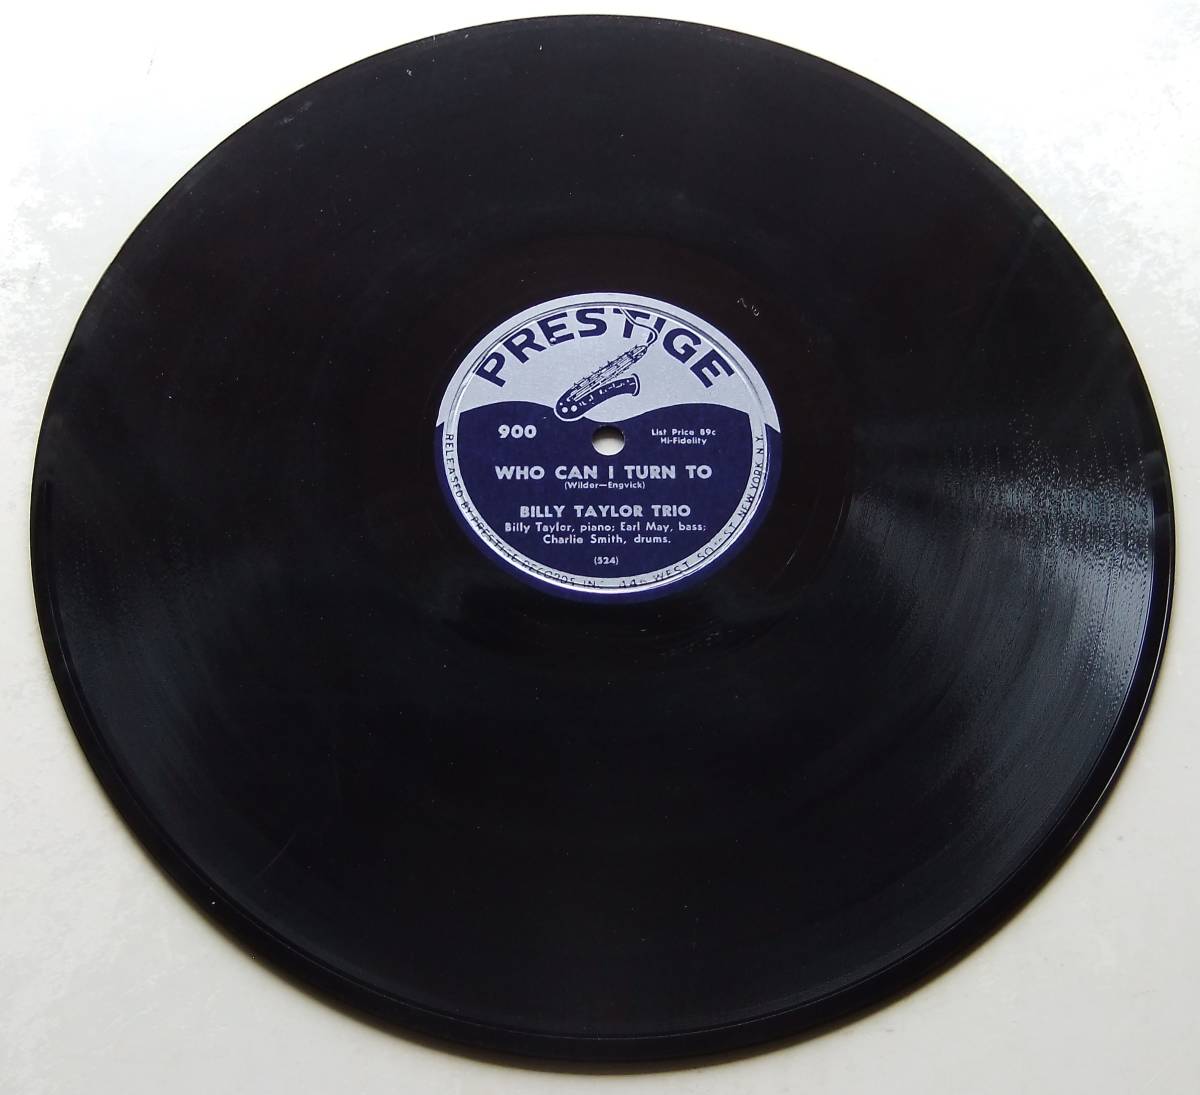 ◆ BILLY TAYLOR Trio / Who Can I Turn To / My One And Only Love ◆ Prestige 900 (78rpm SP) ◆_画像3